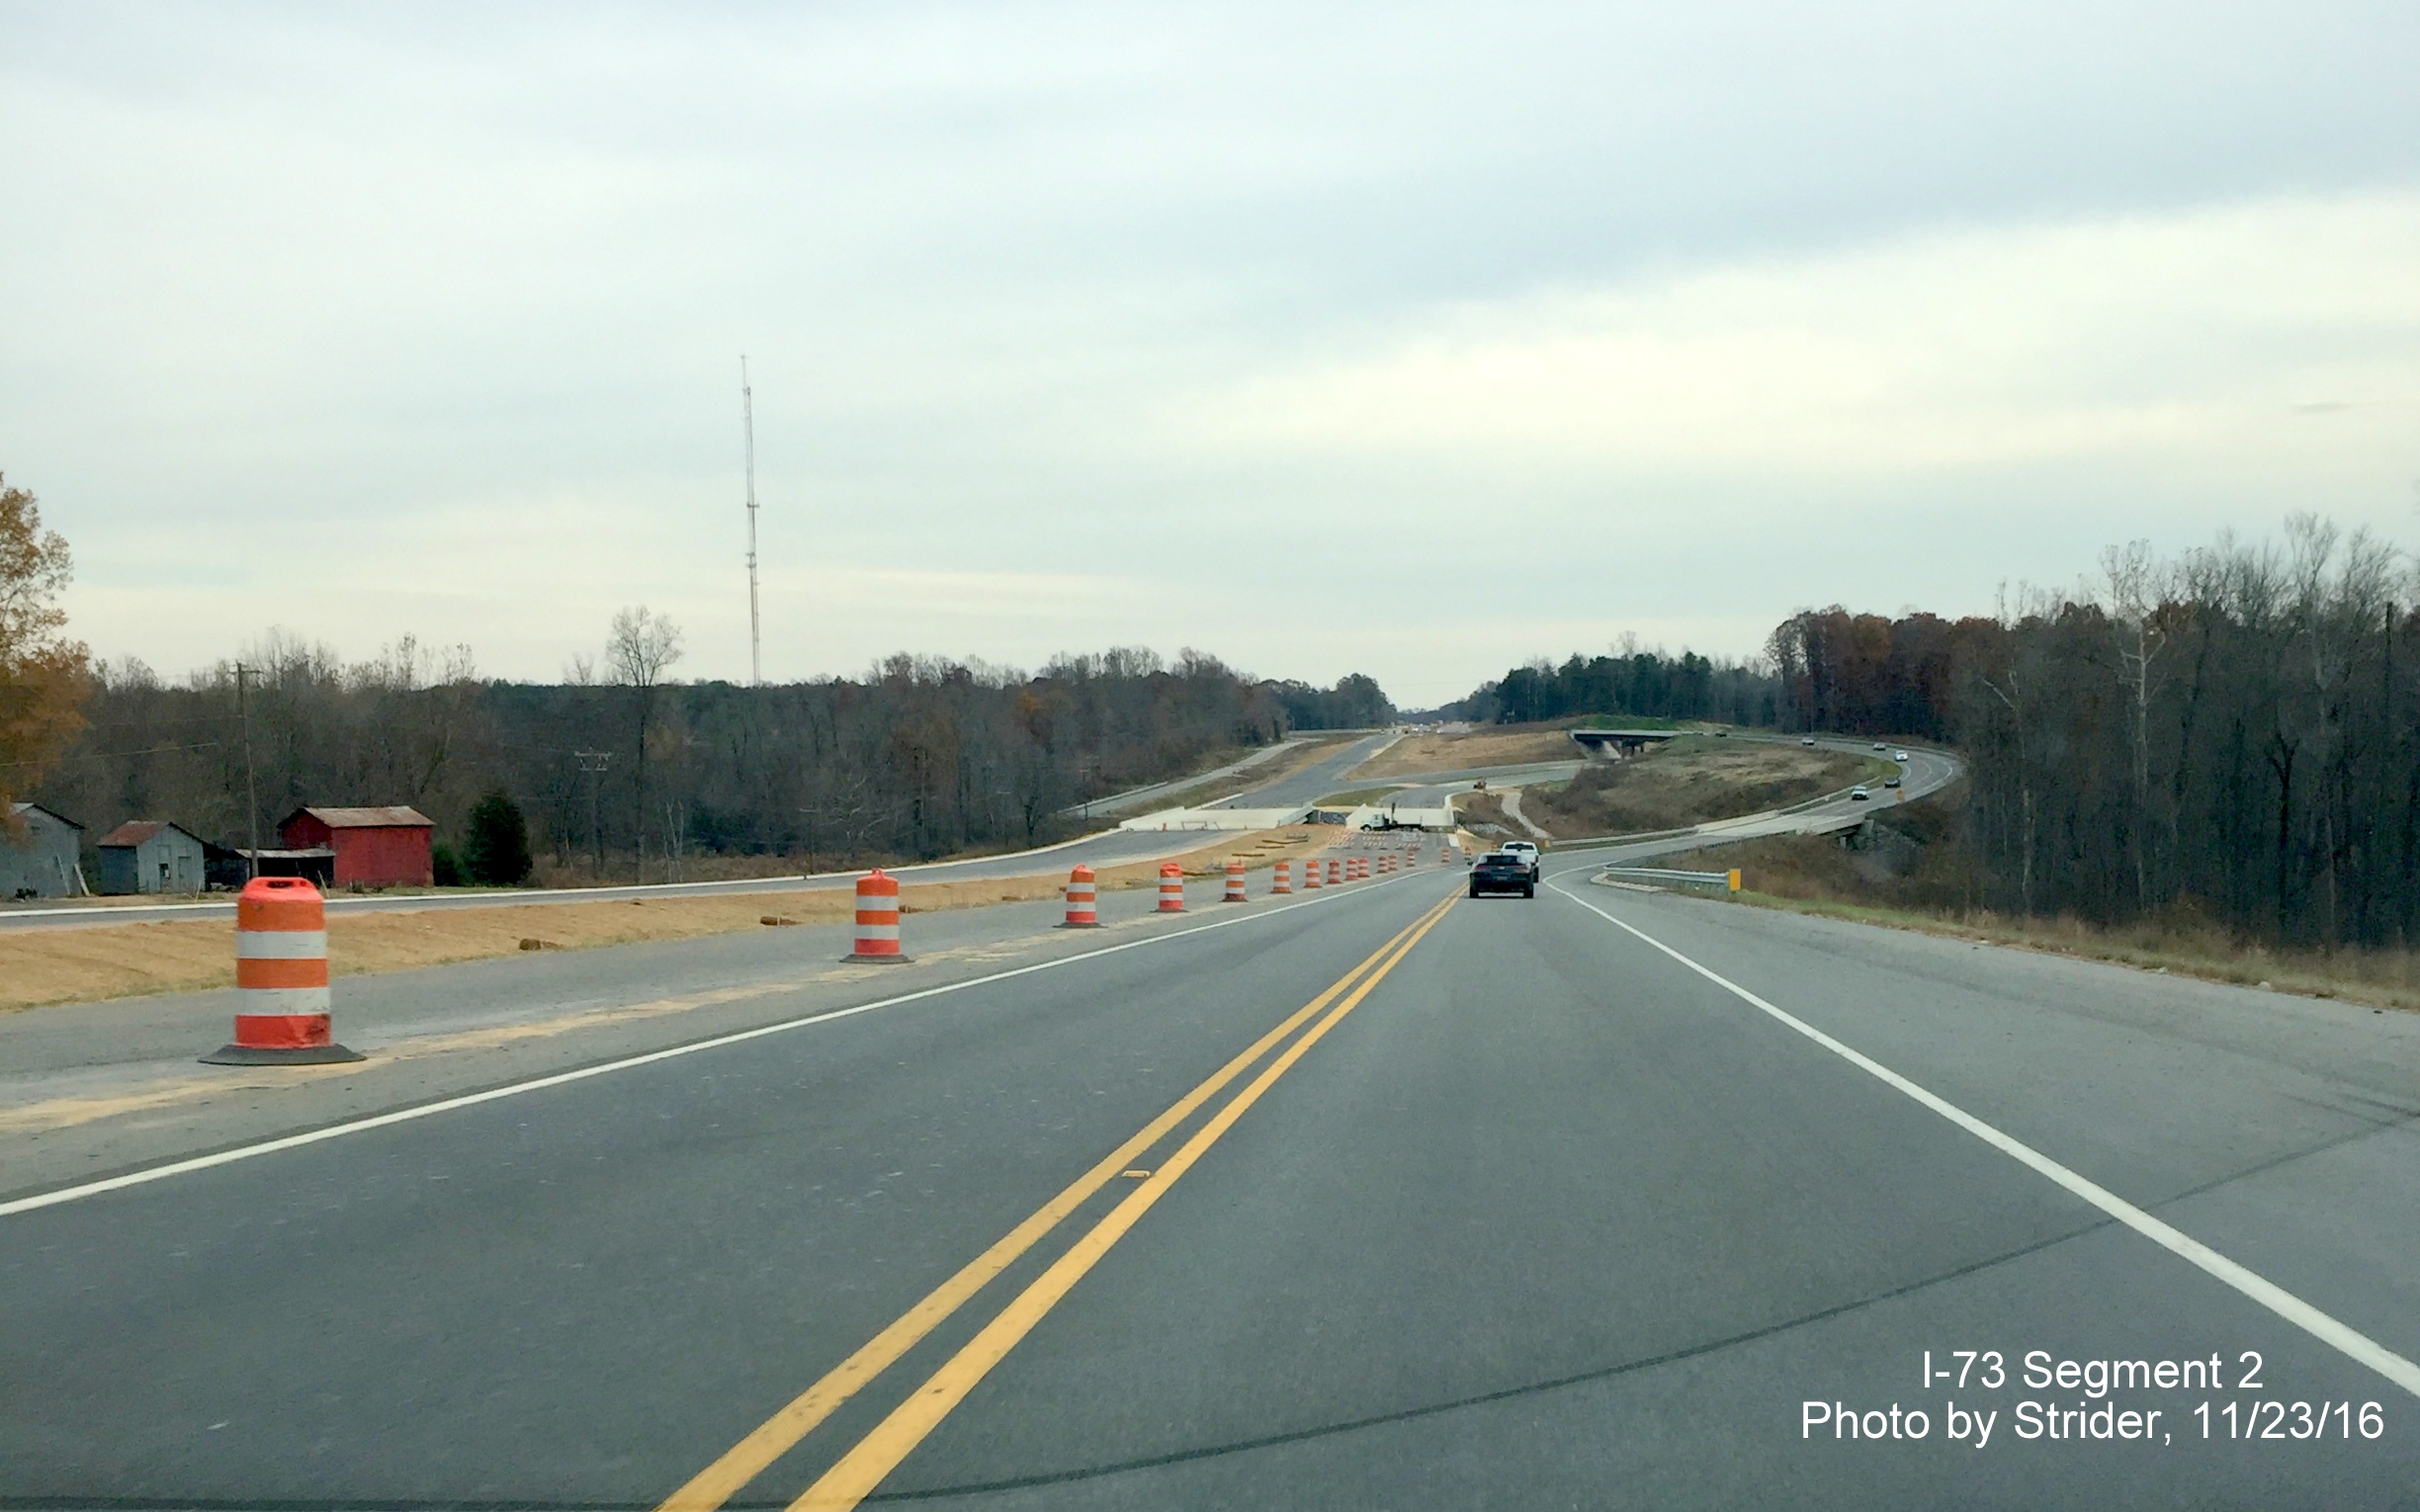 Image looking at nearly completed future interchange between I-73 and US 220 near Haw River in Guilford County, by Strider